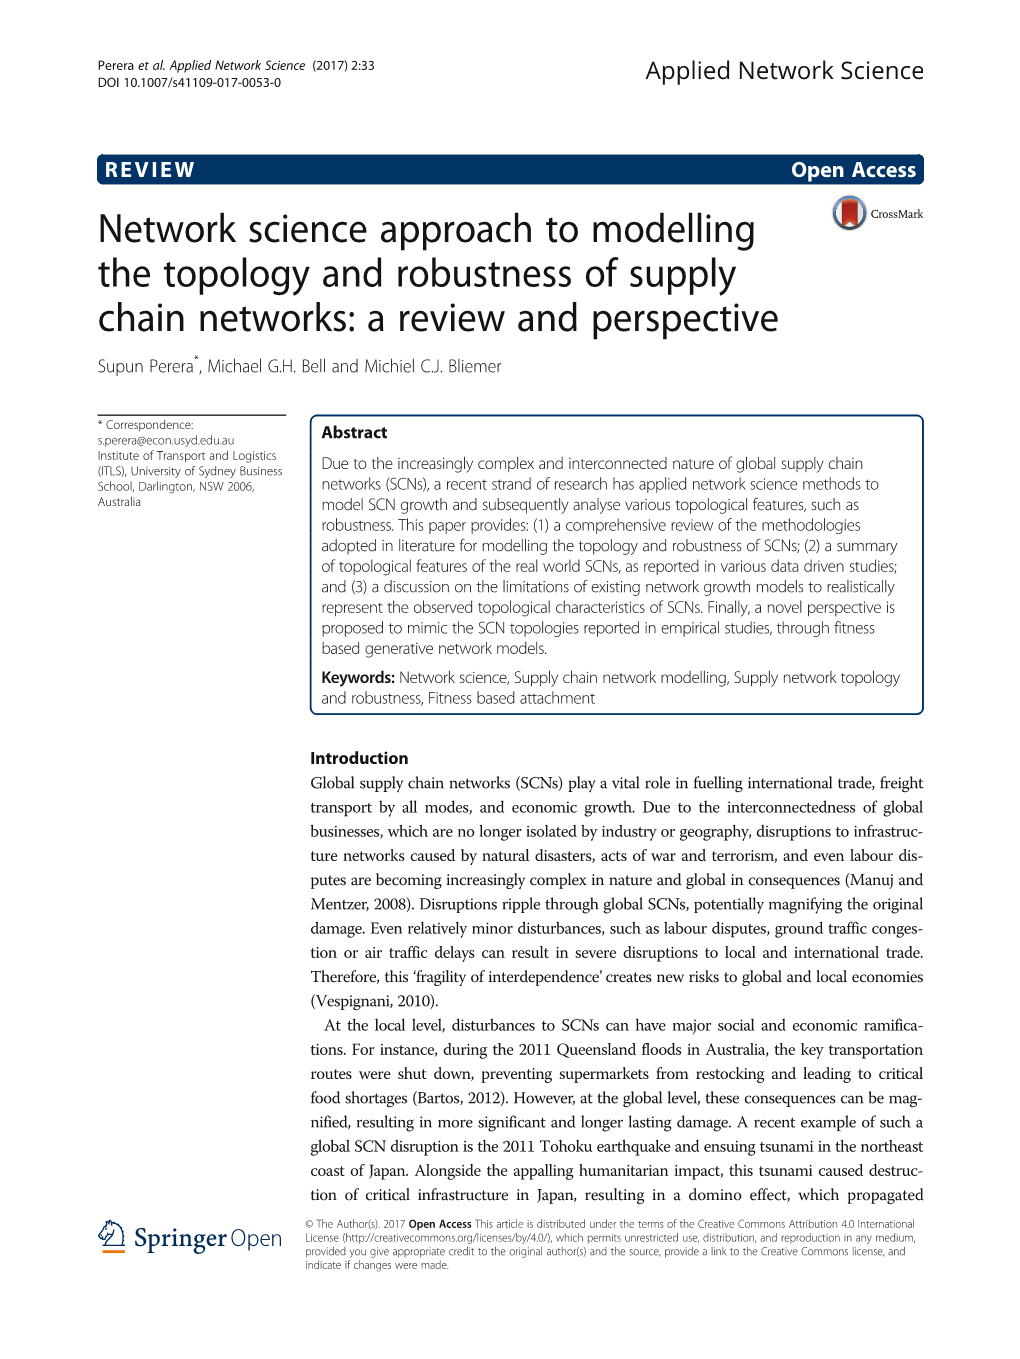 Network Science Approach to Modelling the Topology and Robustness of Supply Chain Networks: a Review and Perspective Supun Perera*, Michael G.H